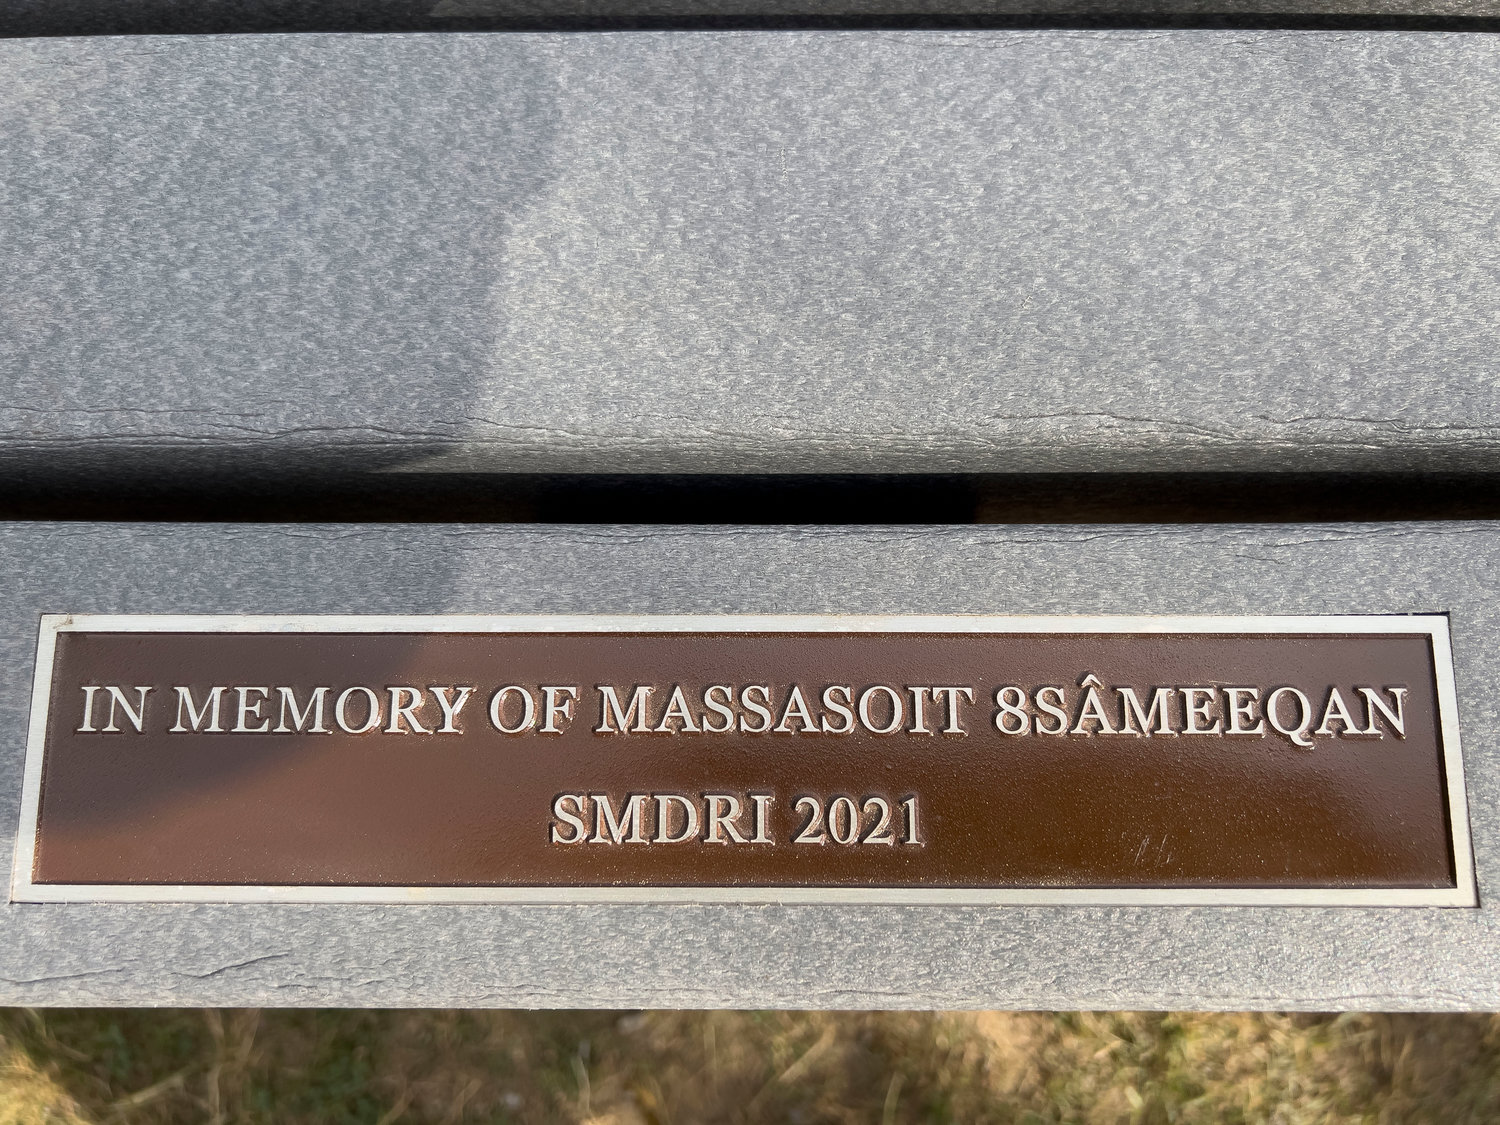 The bench commemorates Massasoit Ousamequin, who assisted early American settlers during their grueling first winters in the New World.